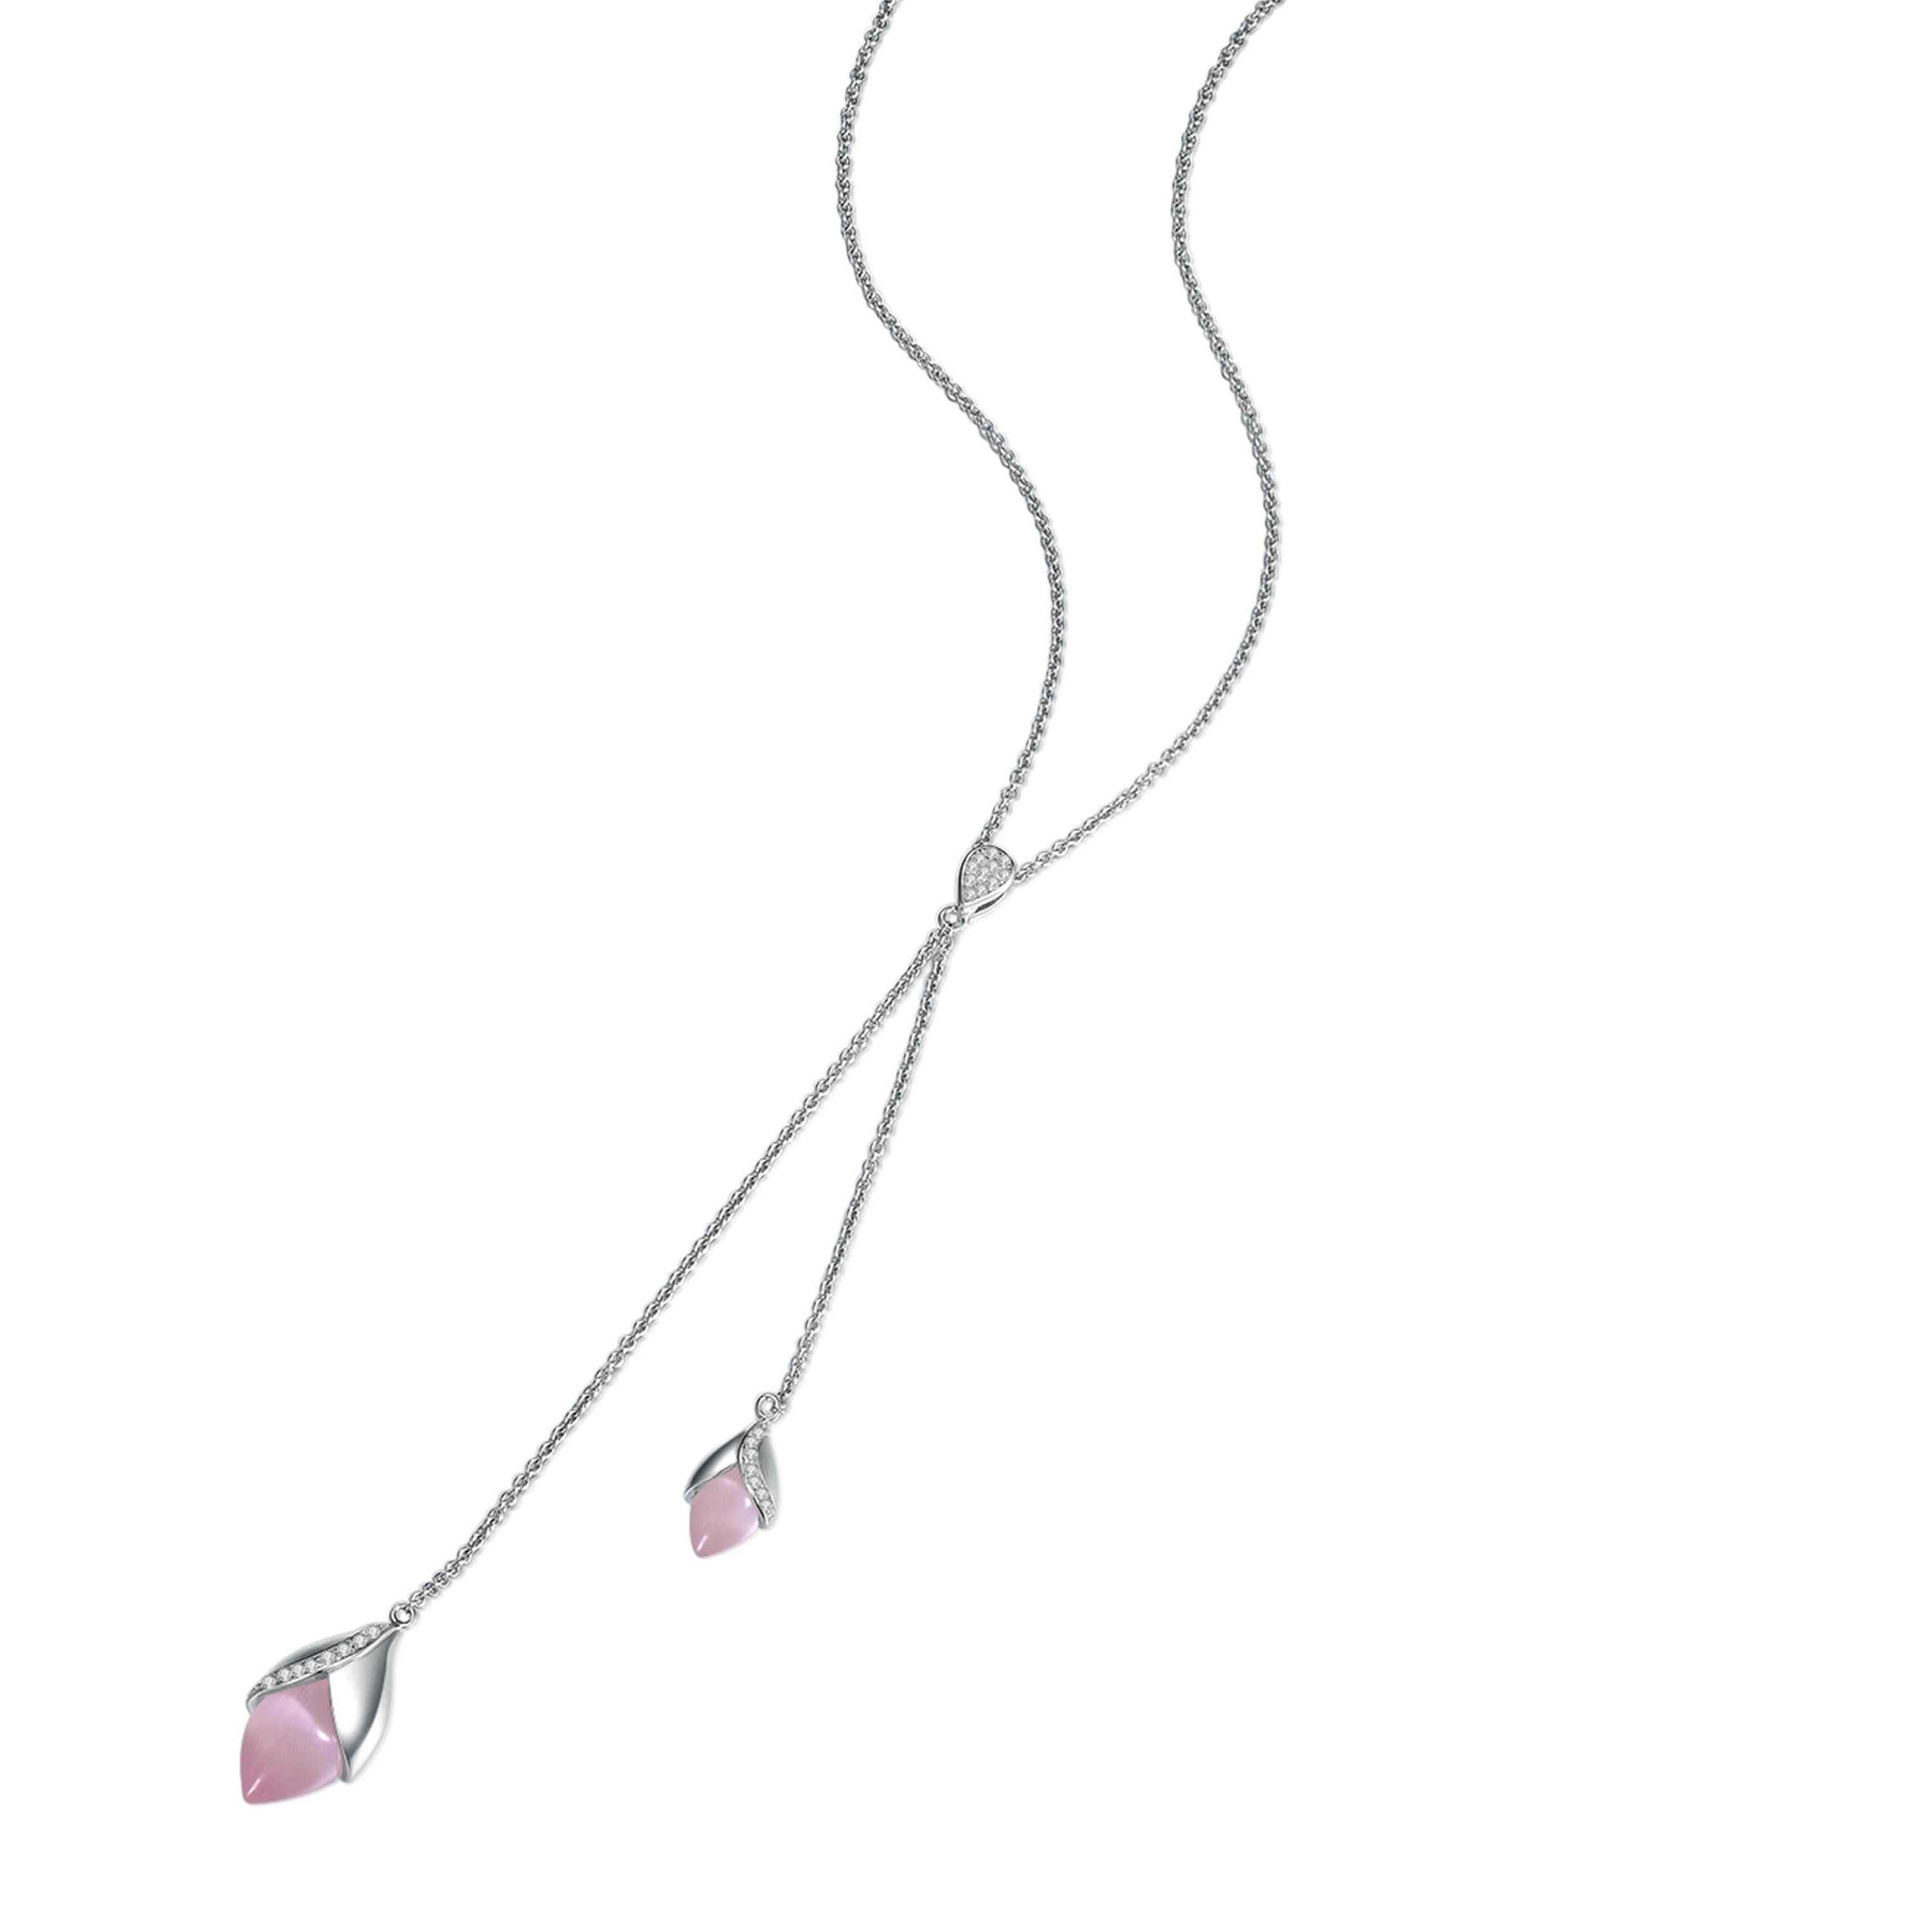 Description:
Magnolia lariat necklace with two pink cat's eye stones in varying sizes and cubic zirconia, set in satin and mirror polish white rhodium plate on sterling silver.

Inspiration:
This capsule collection blossoms with the pretty cat’s